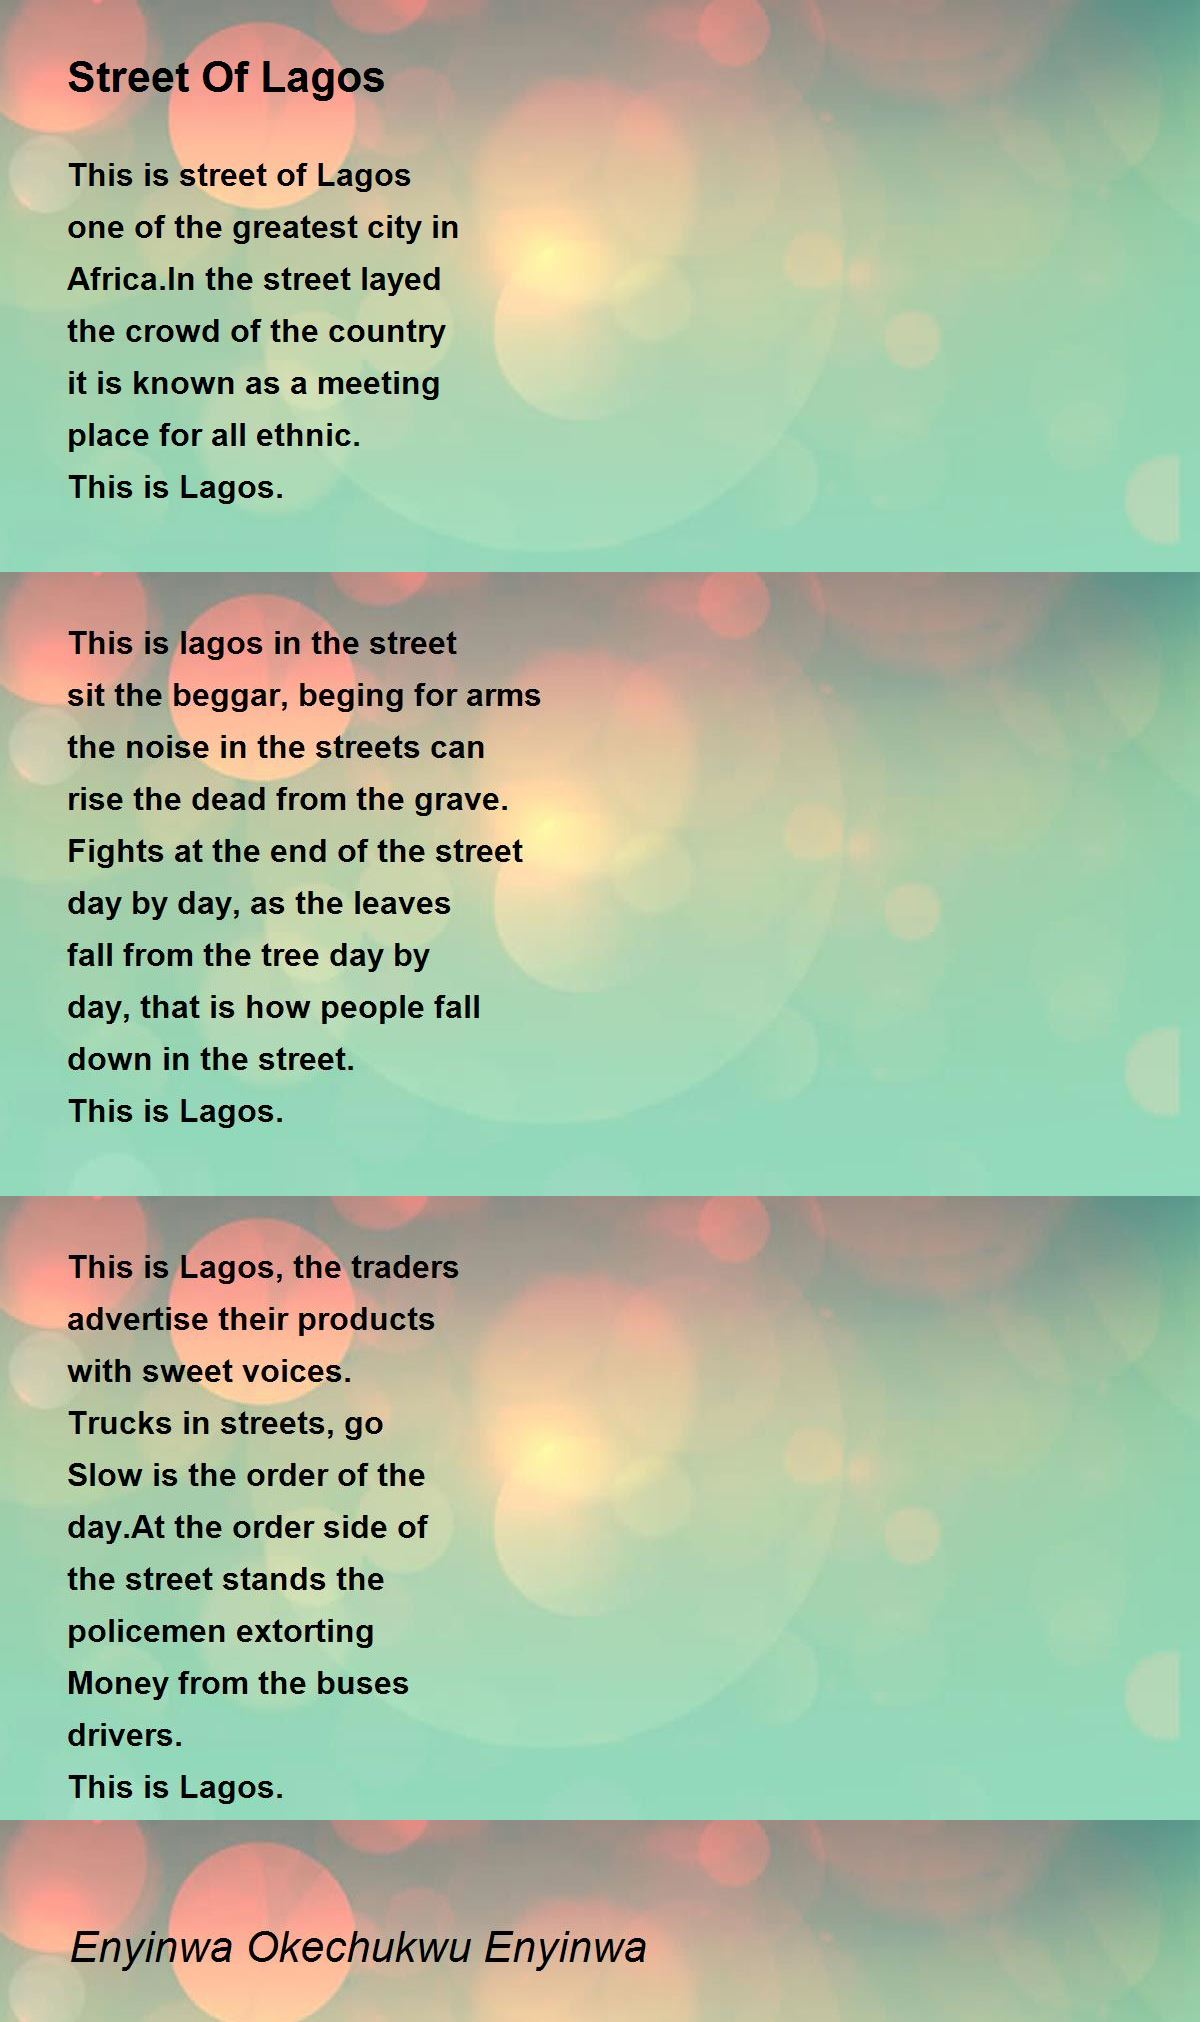 Our First Kiss - Our First Kiss Poem by Enyinwa Okechukwu Enyinwa